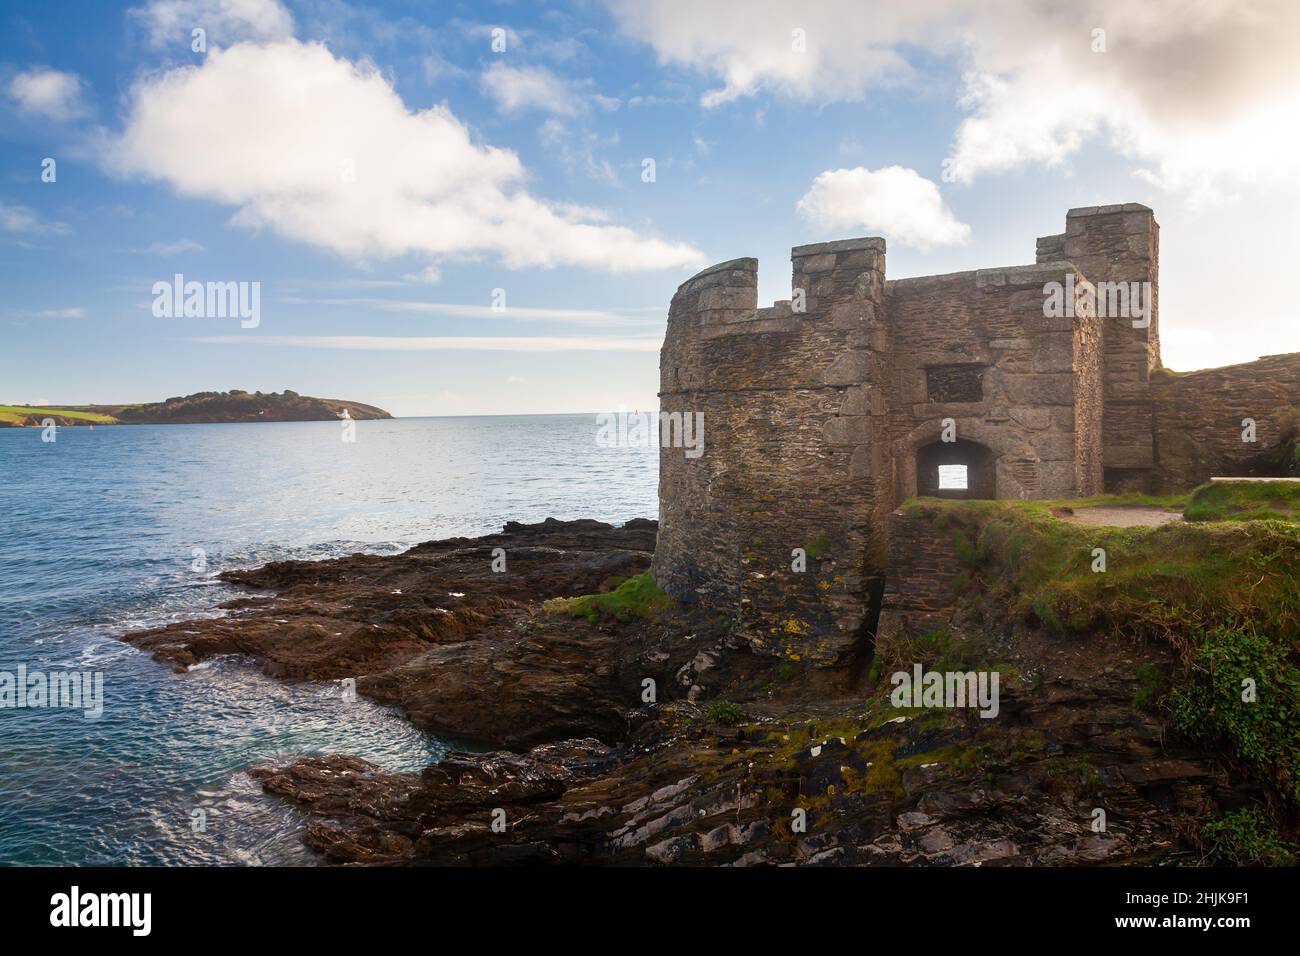 The Tudor Blockhouse known as Little Dennis at Pendennis Point Falmouth Cornwall England UK Stock Photo